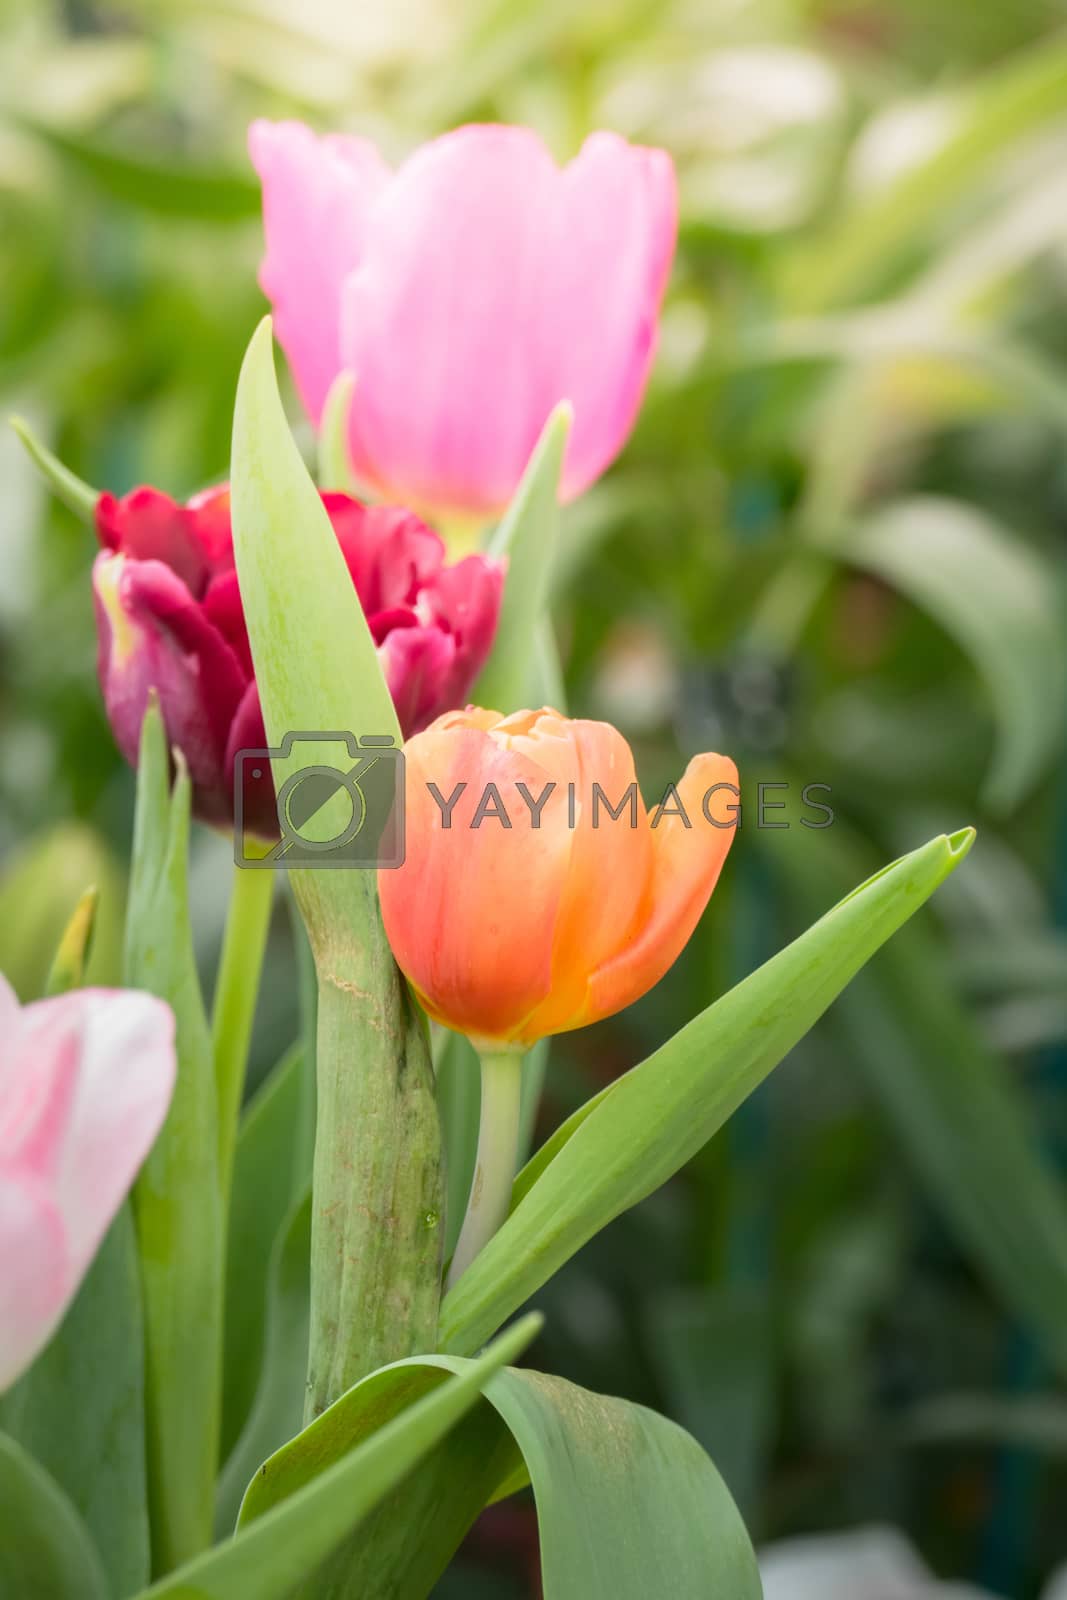 Royalty free image of Beautiful bouquet of tulips. colorful tulips. by teerawit